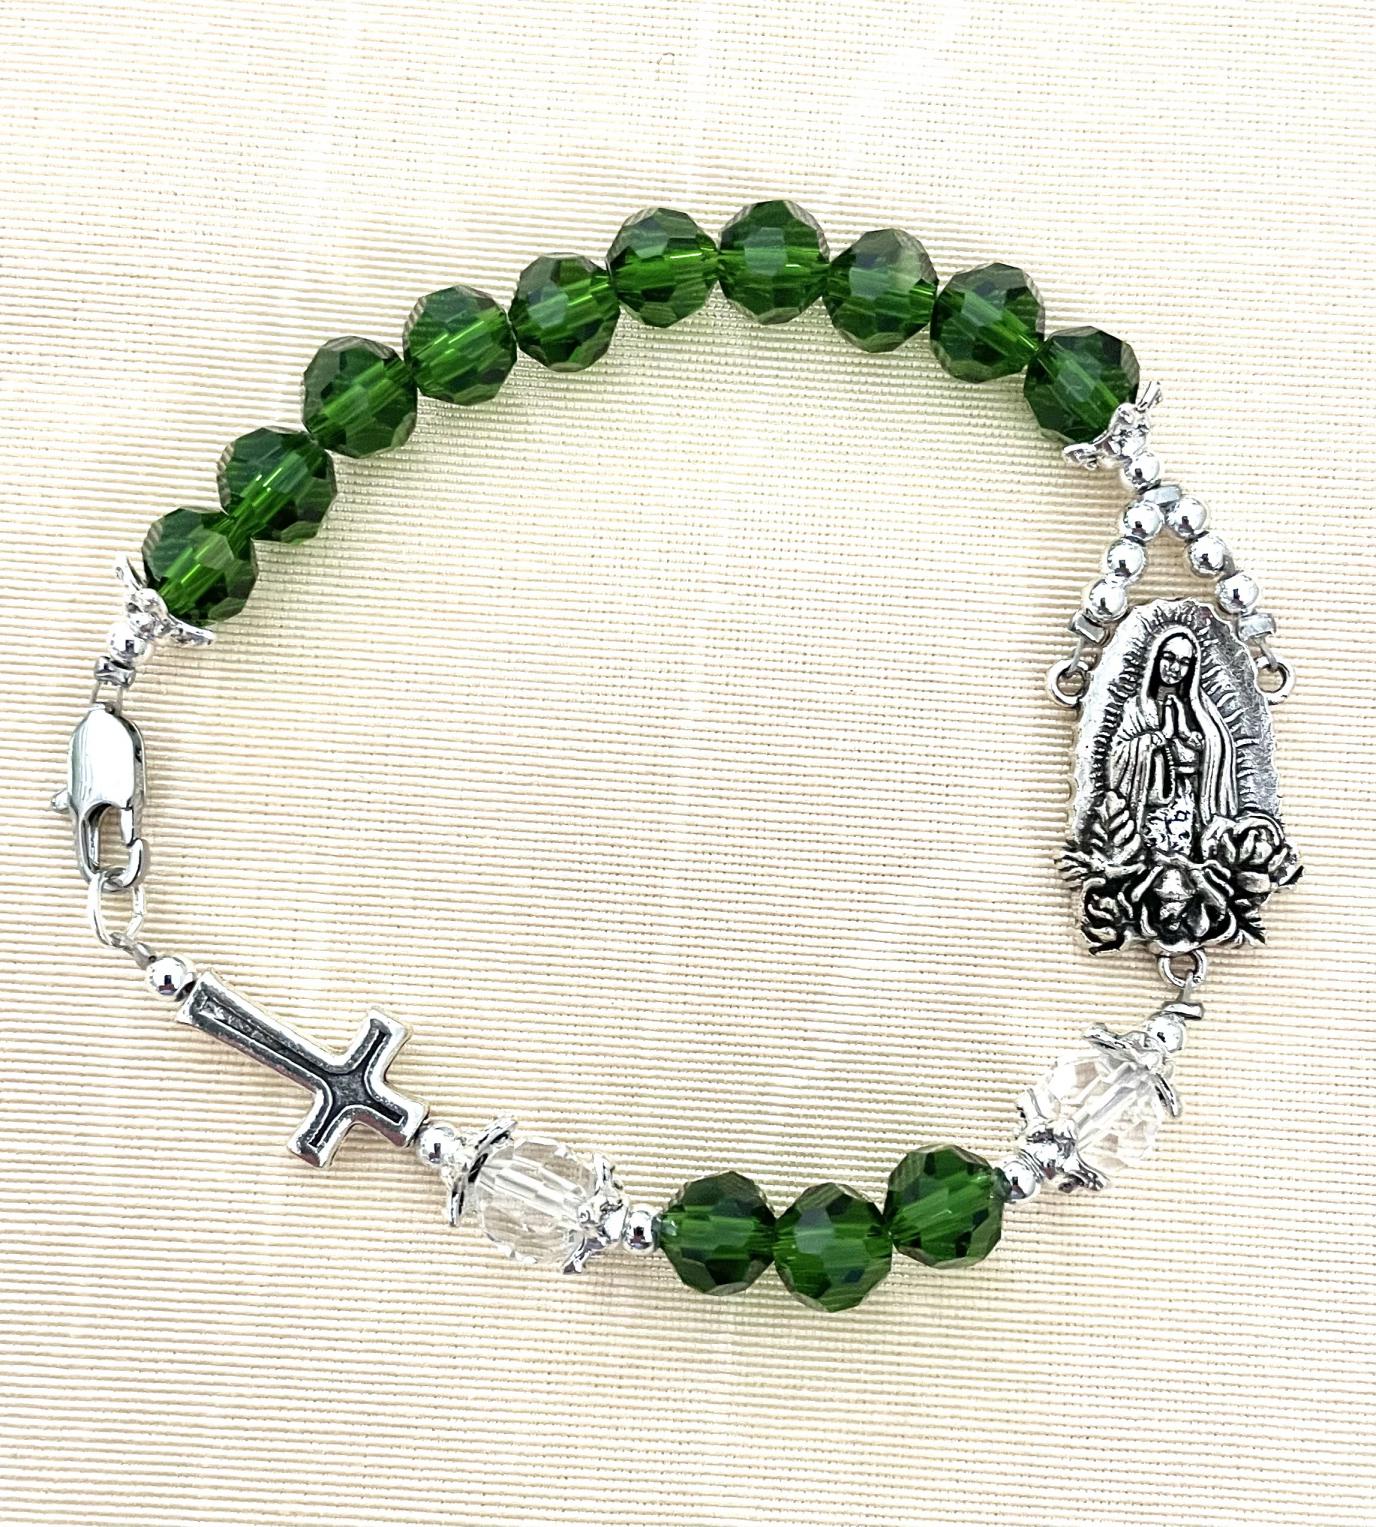 OUR LADY OF GUADALUPE MEDAL AND EMERALD BEAD ROSARY BRACELET